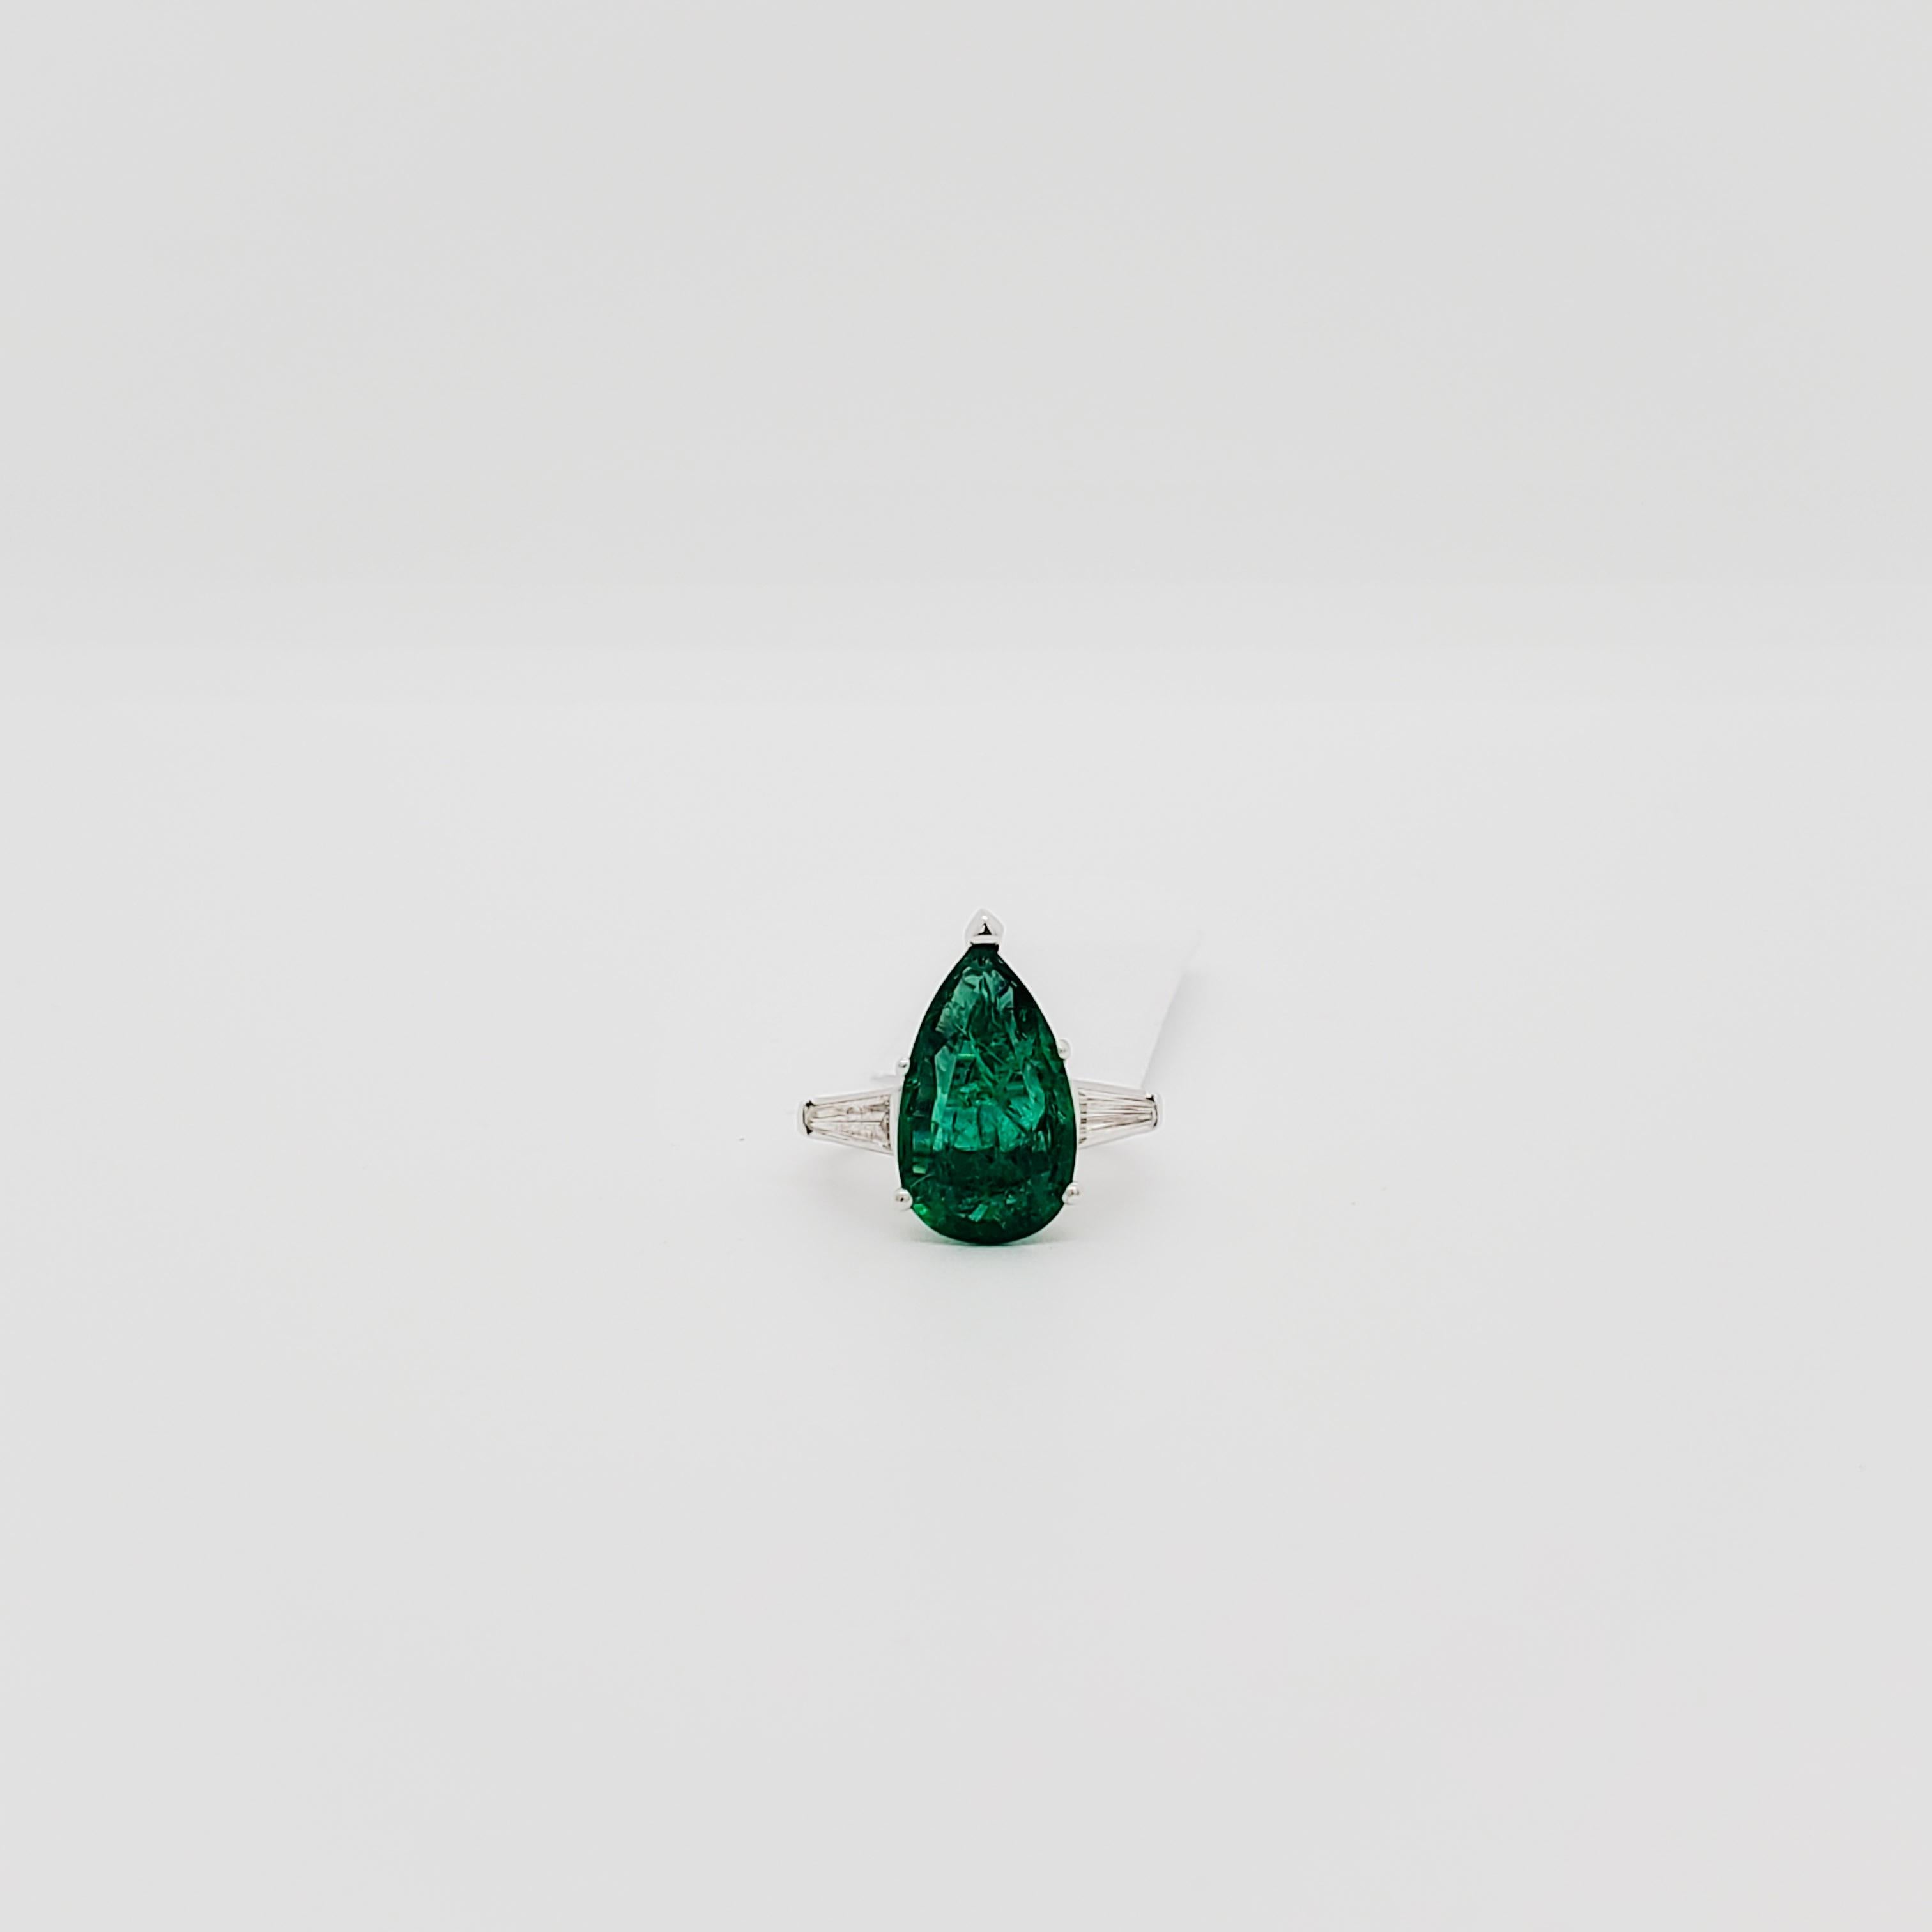 Beautiful deep green 3.70 ct. emerald pear shape with 0.30 ct. white diamond baguettes.  Handmade in platinum.  Ring size 3.  Can be easily resized.